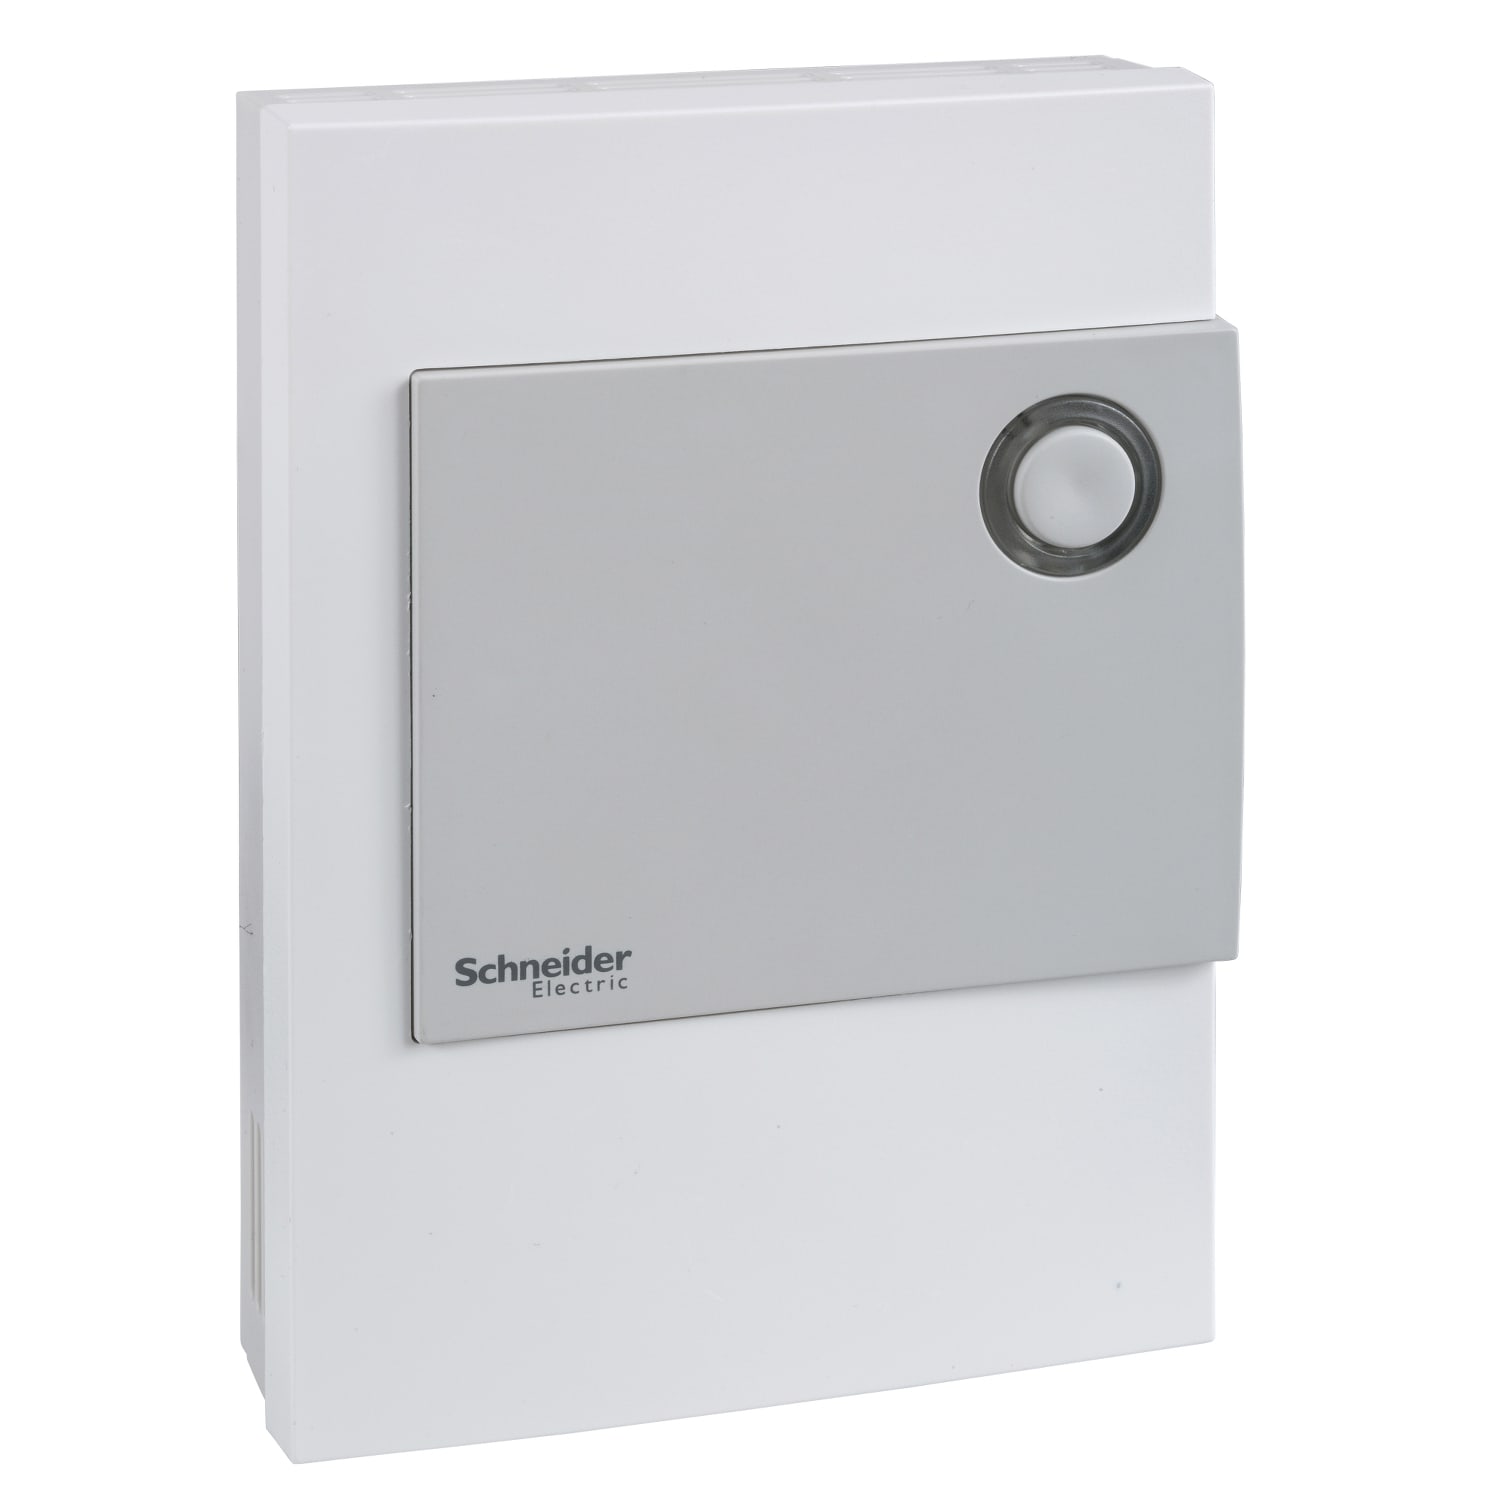 THERMACOME - Thermostat d'ambiance connecté filaire blanc My